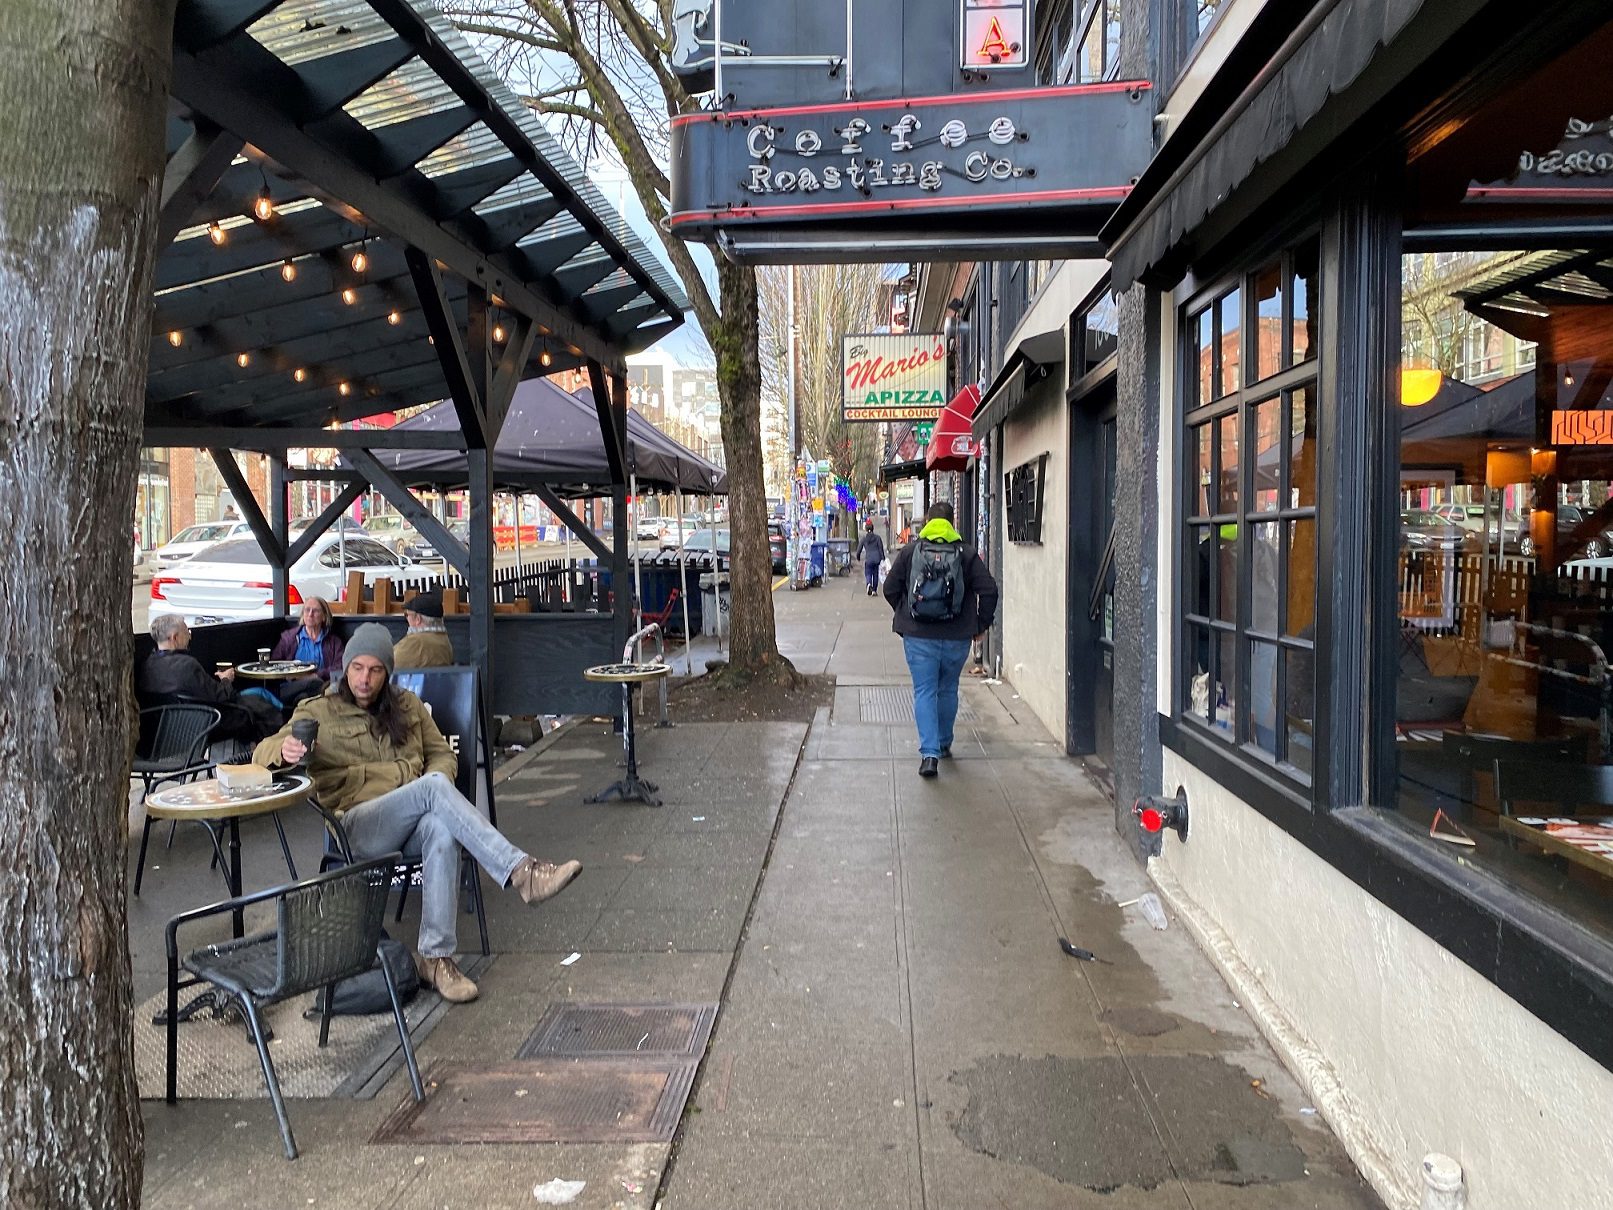 Outdoor dining and coffee-sipping space in Seattle’s Capitol Hill neighborhood. A person can be seen sitting while drinking a coffee, as another person walks down the sidewalk.